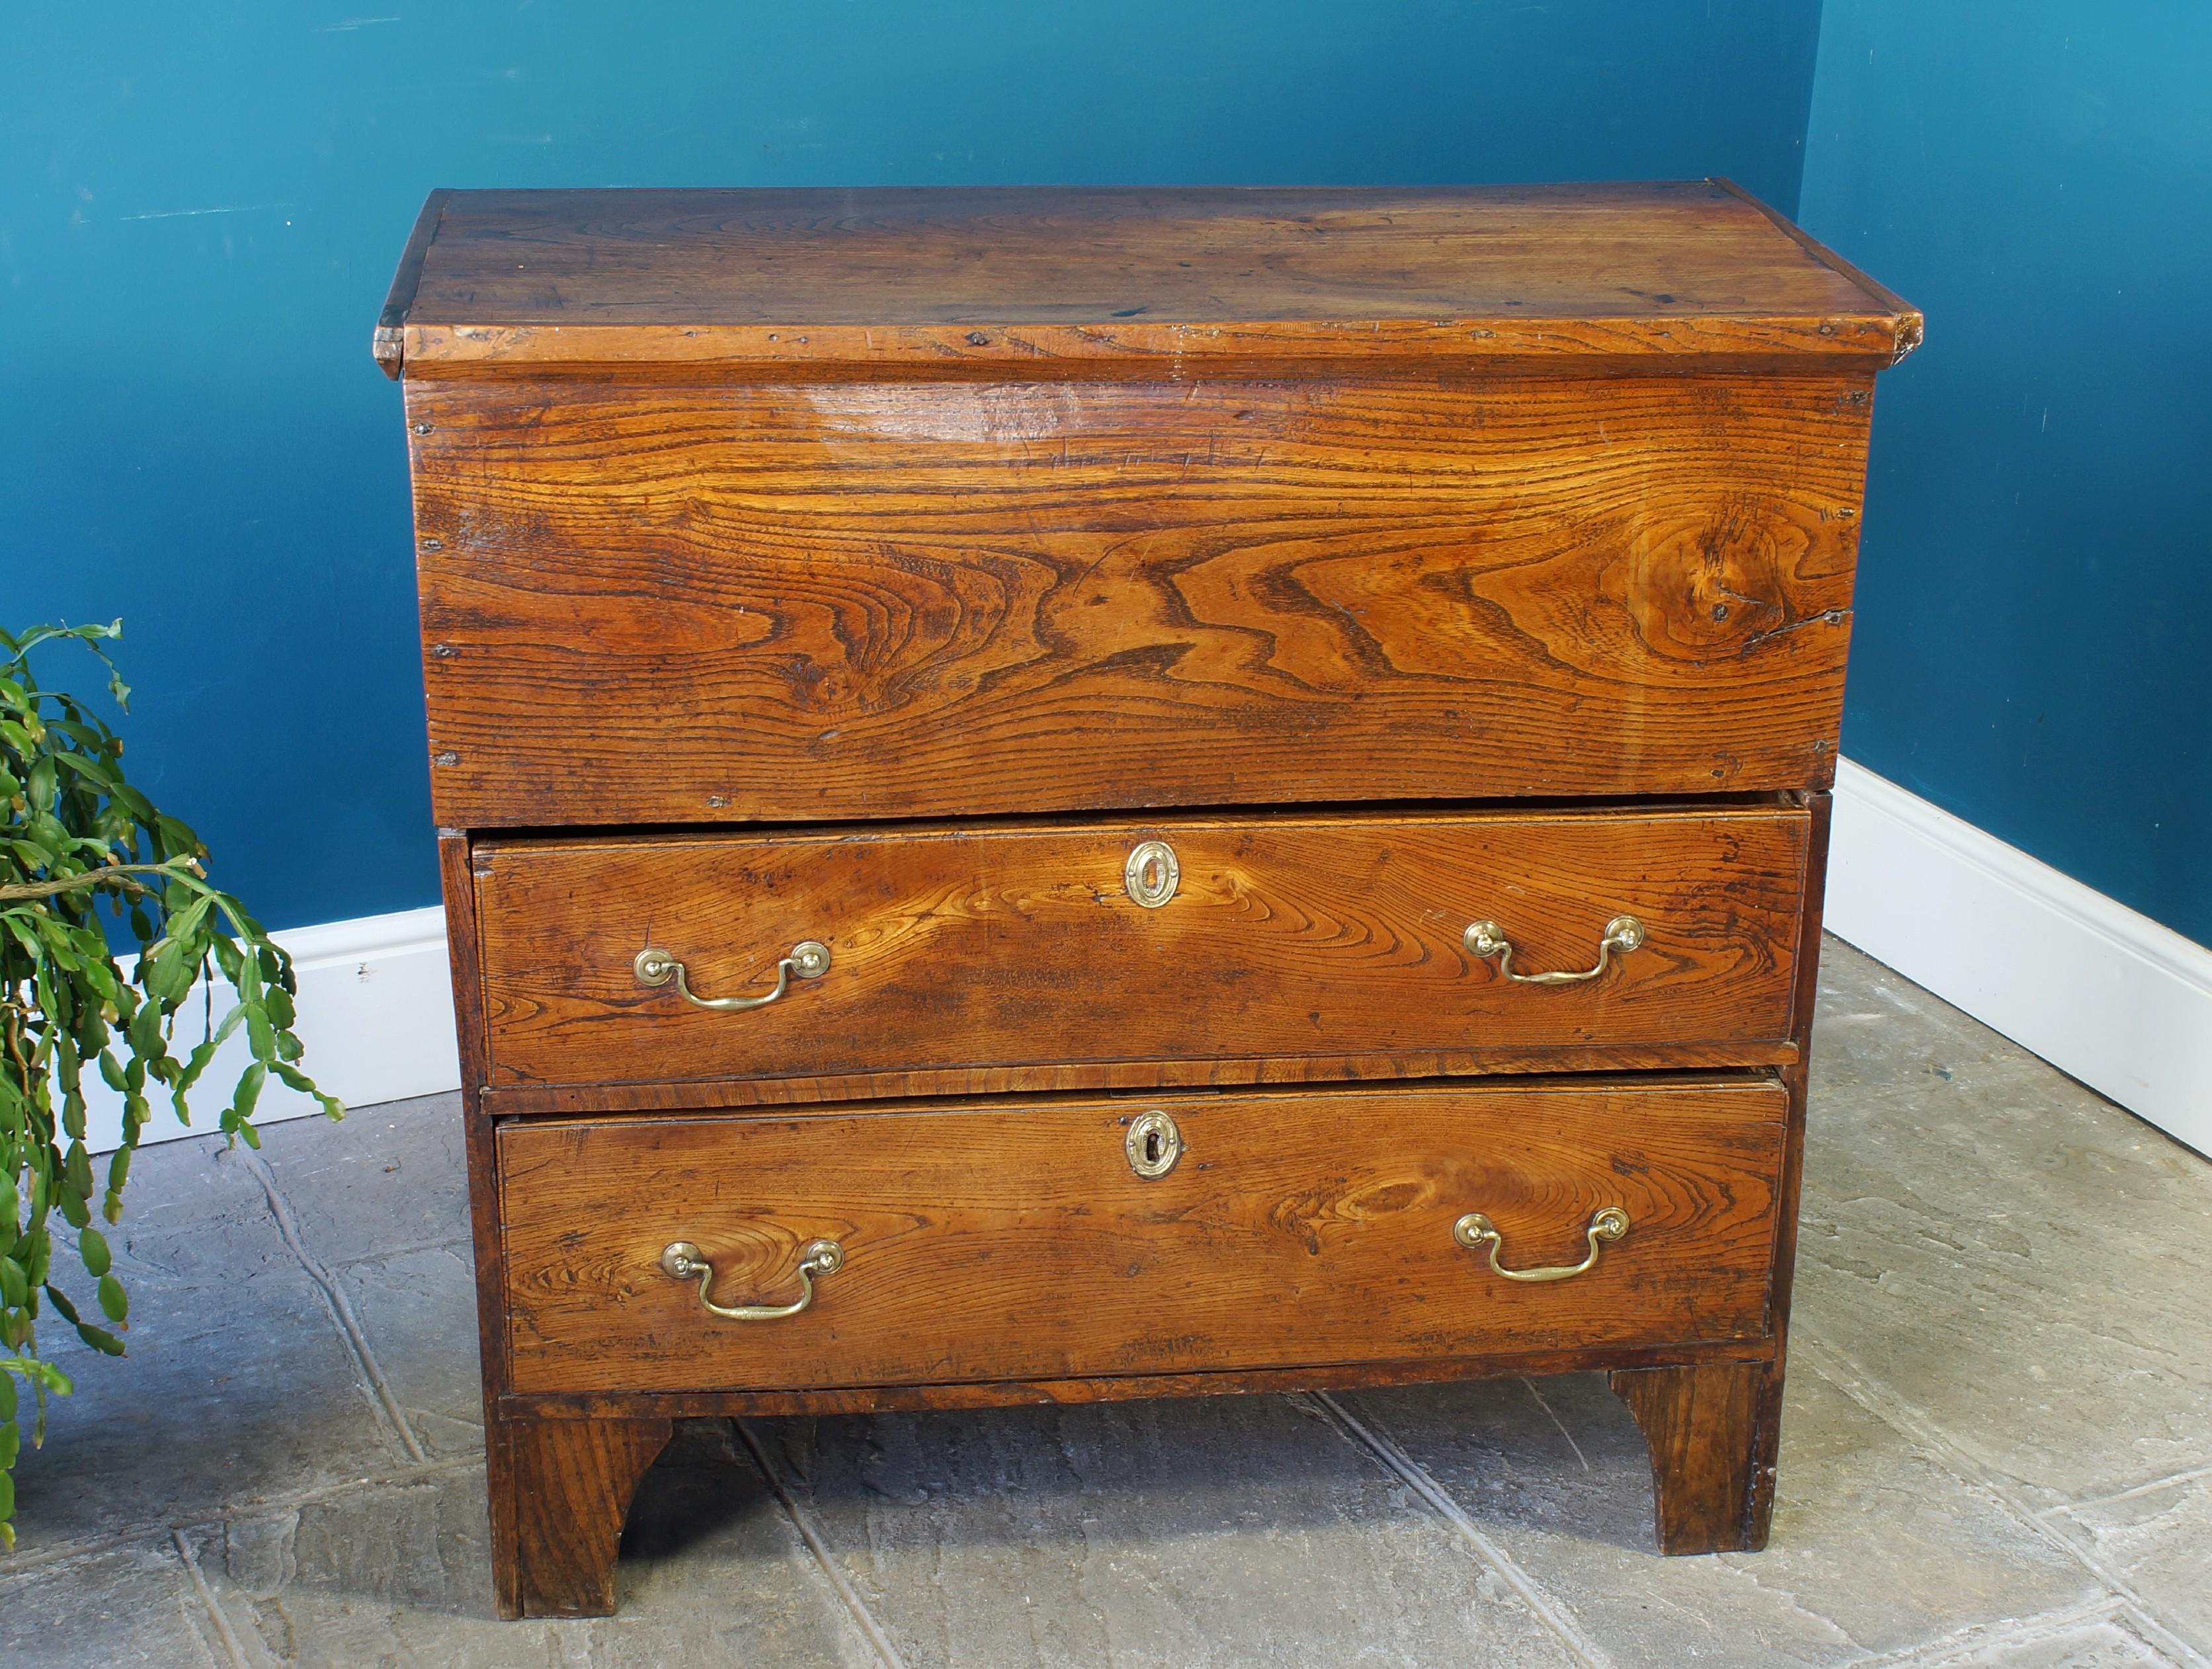 An Elm Mule Chest of the most wonderful colour and patina.
This form is often found in early American furniture but this is an English/Welsh example.
In fantastic condition retaining the original brass handles and escutcheons.
Made from broad Elm